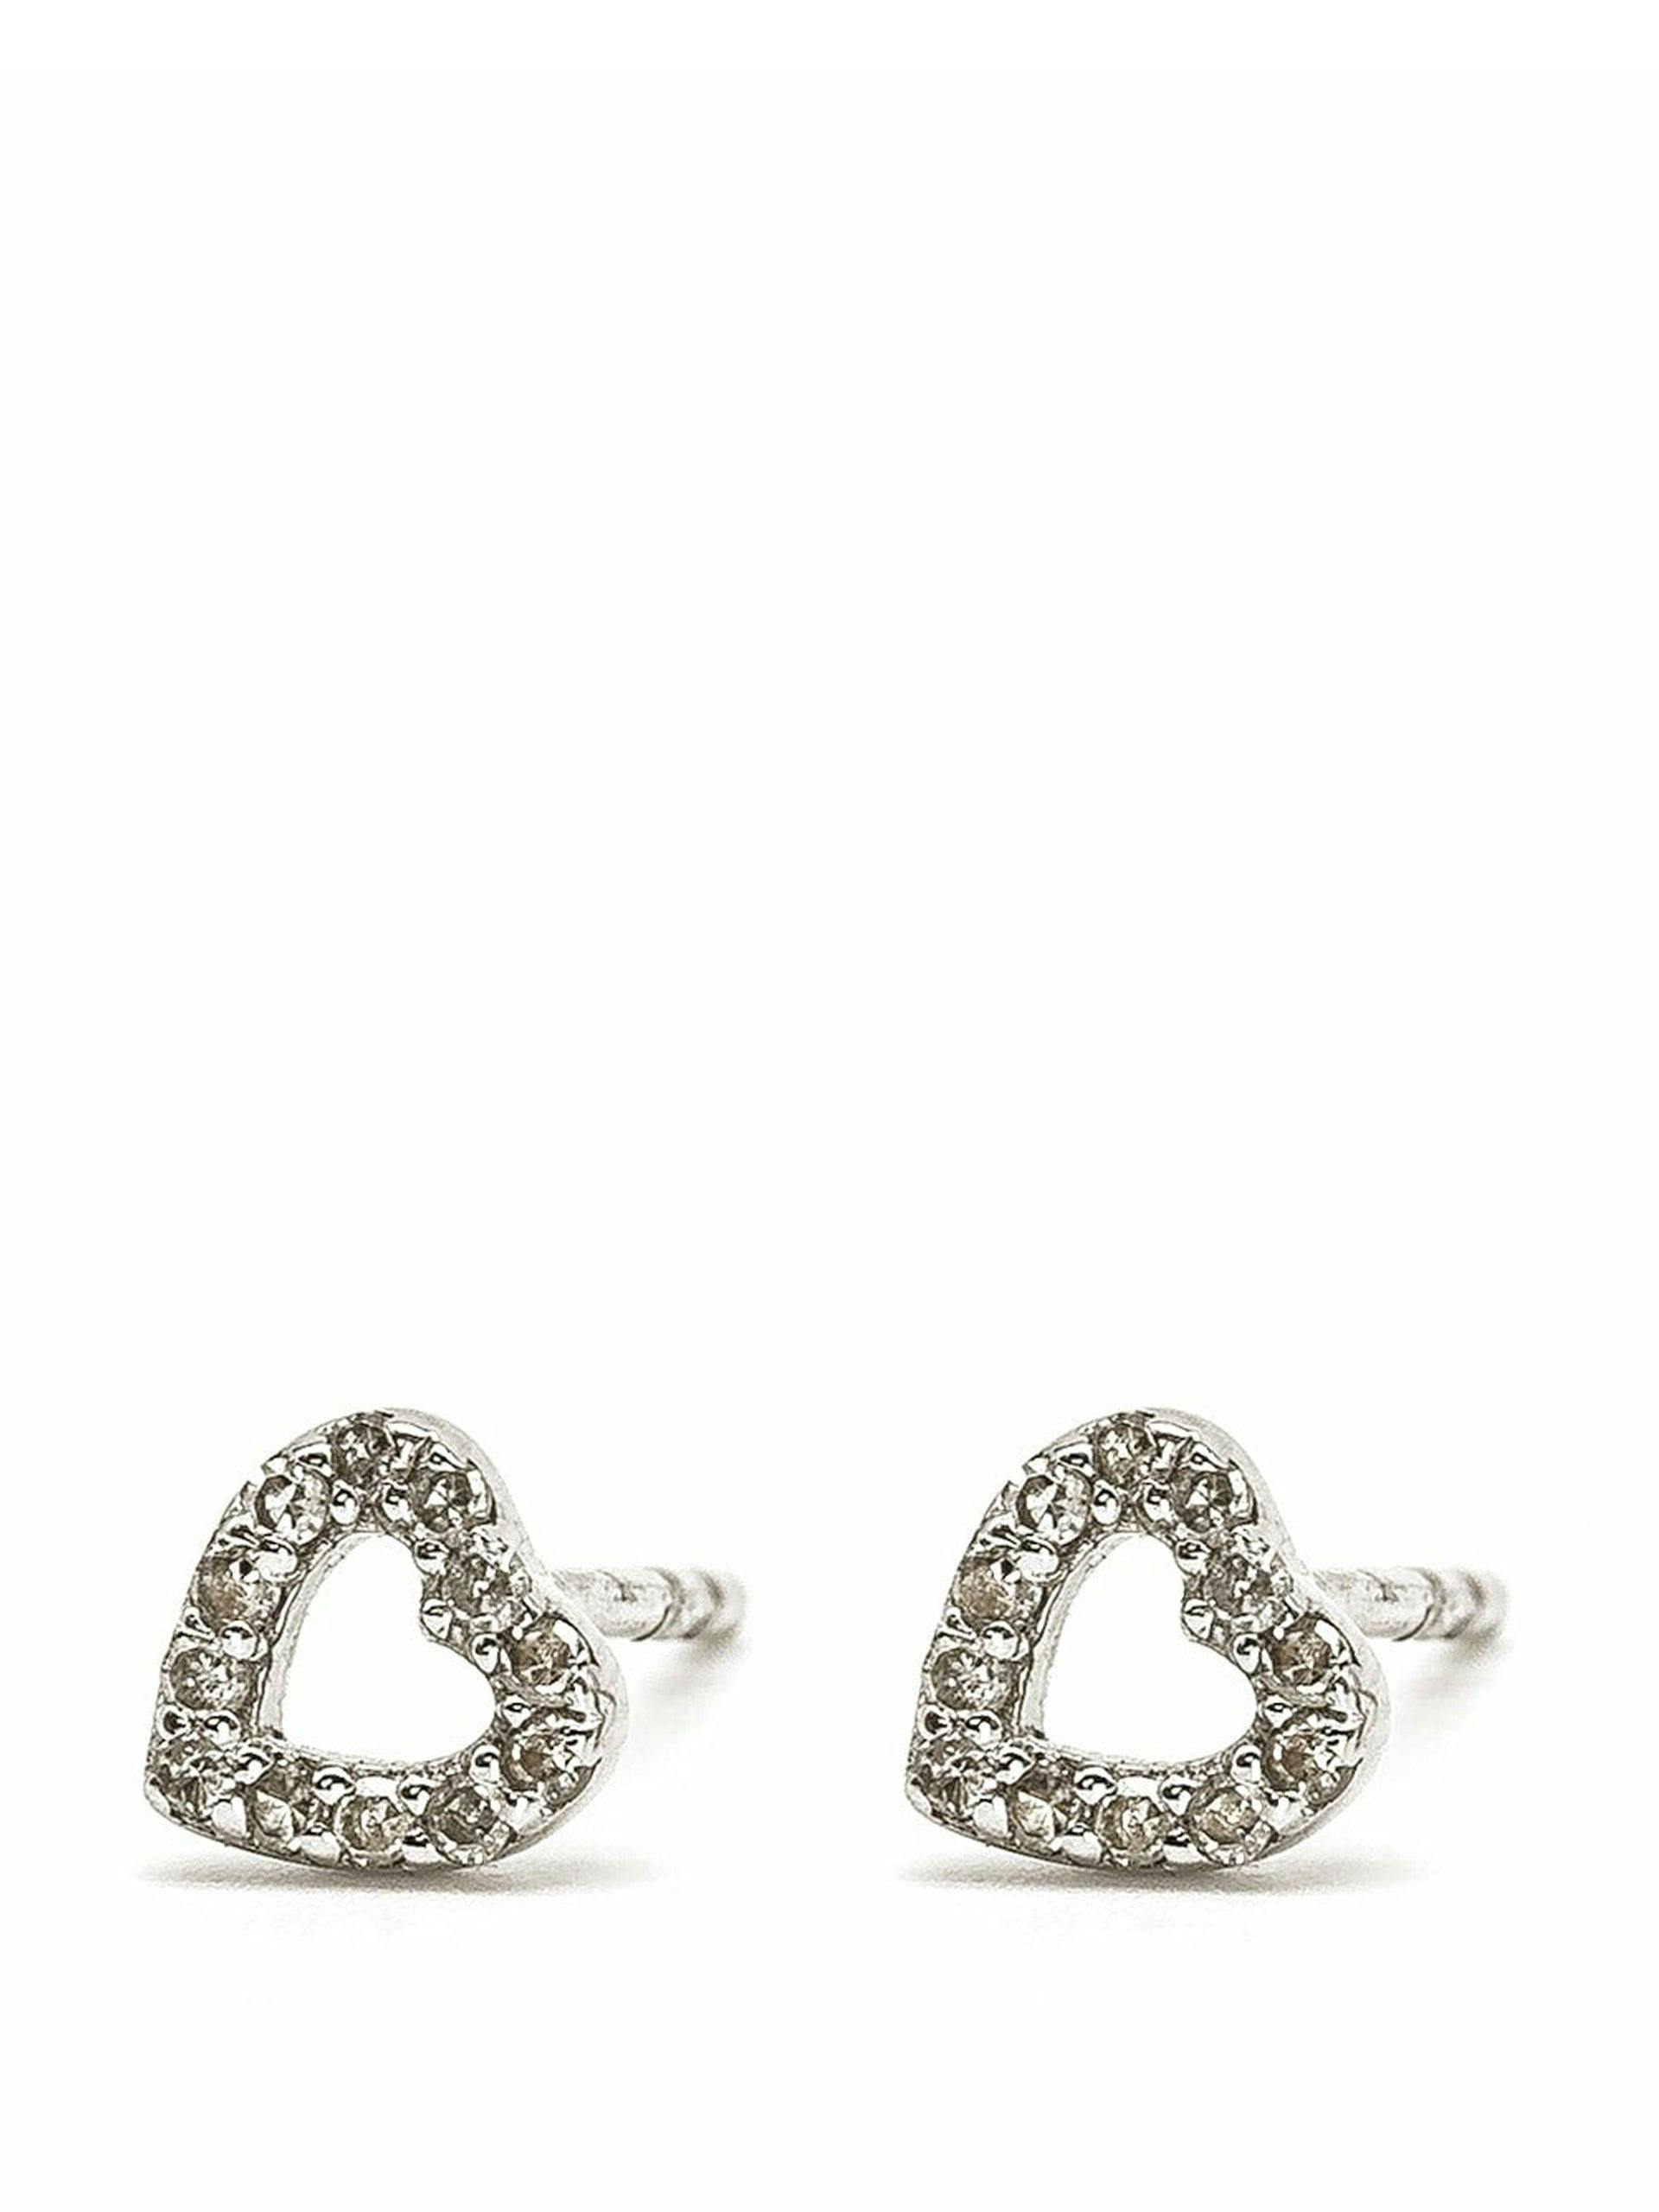 Diamond and silver heart studs